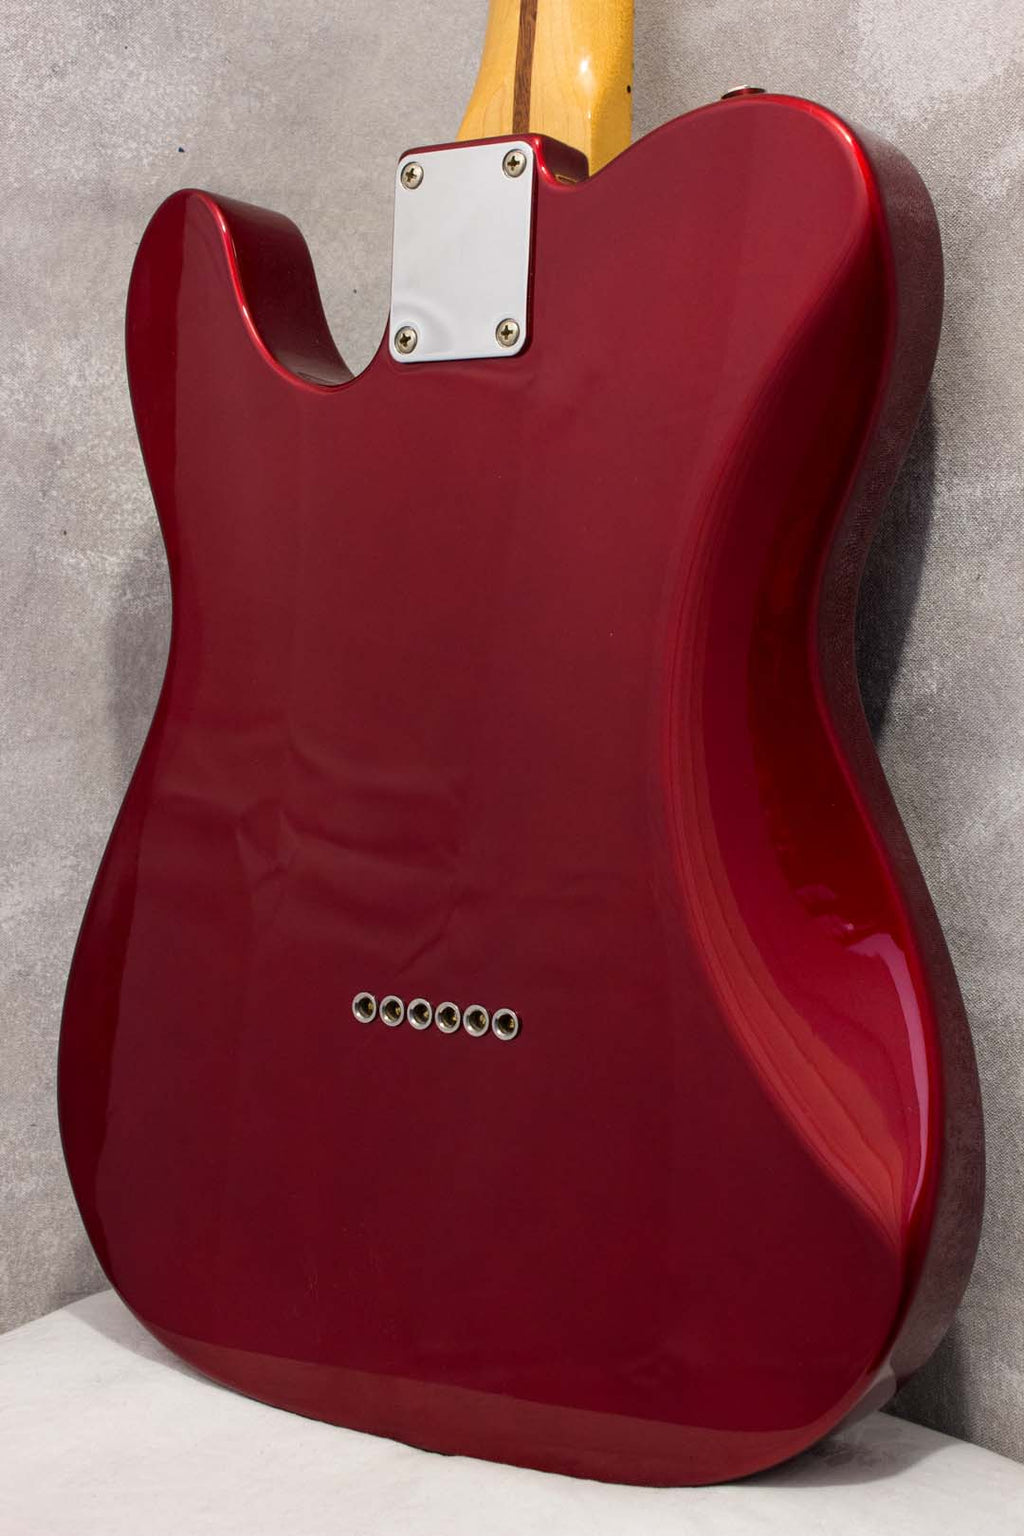 Fender Standard Telecaster HH Candy Apple Red 2010